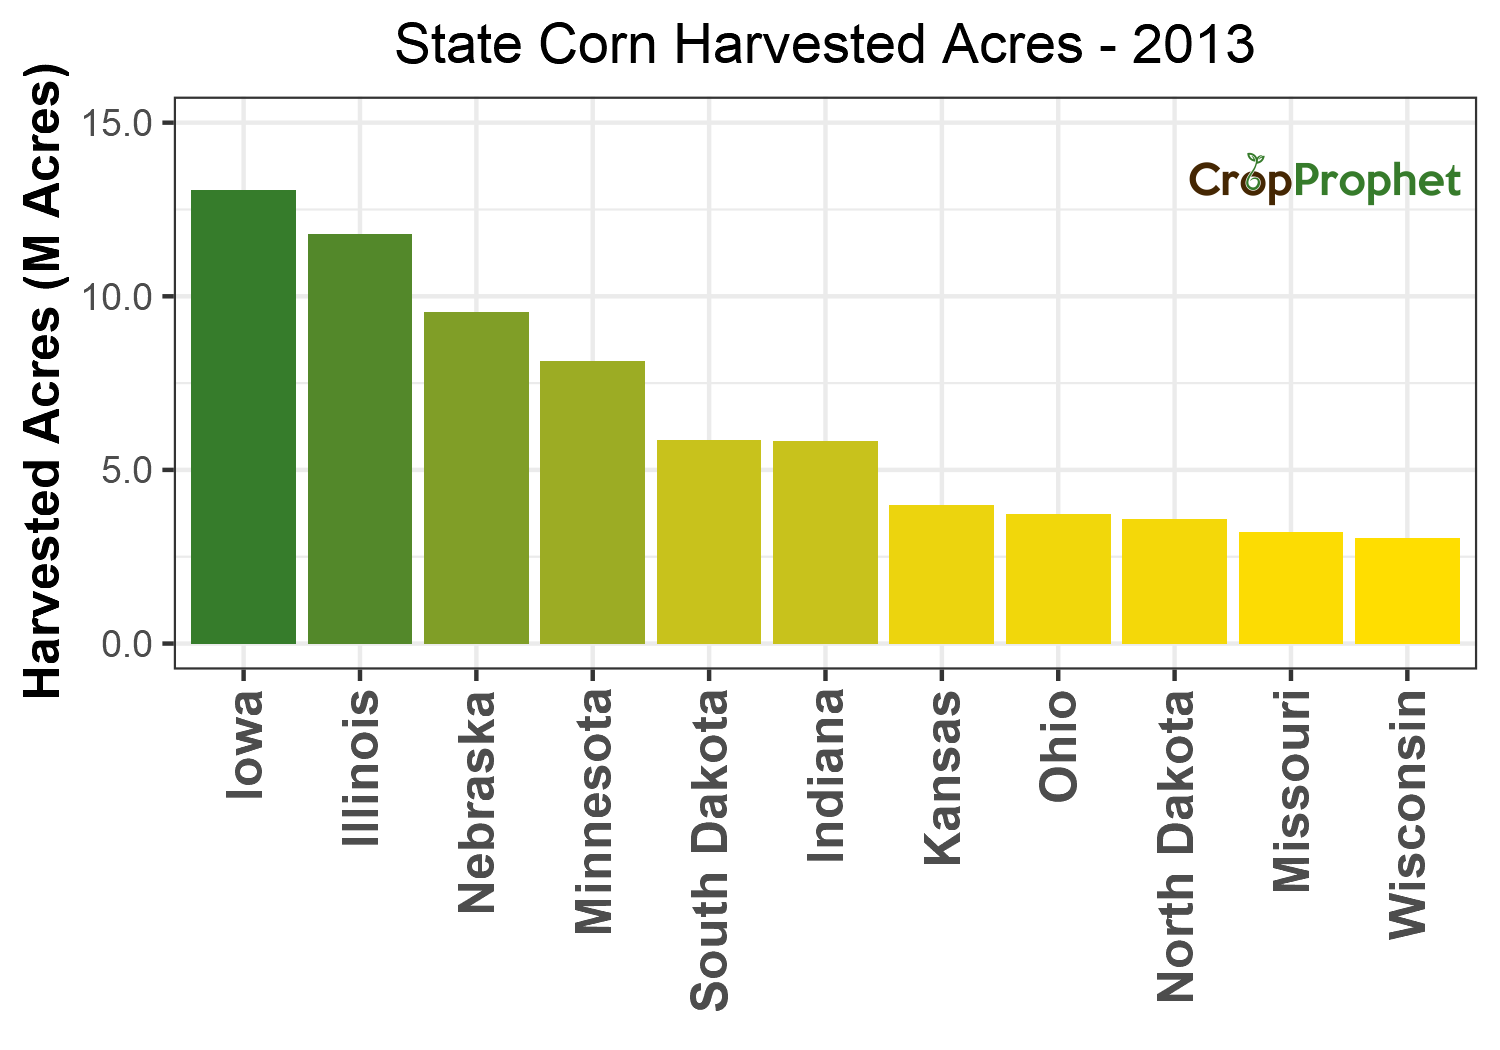 Corn Harvested Acres by State - 2013 Rankings